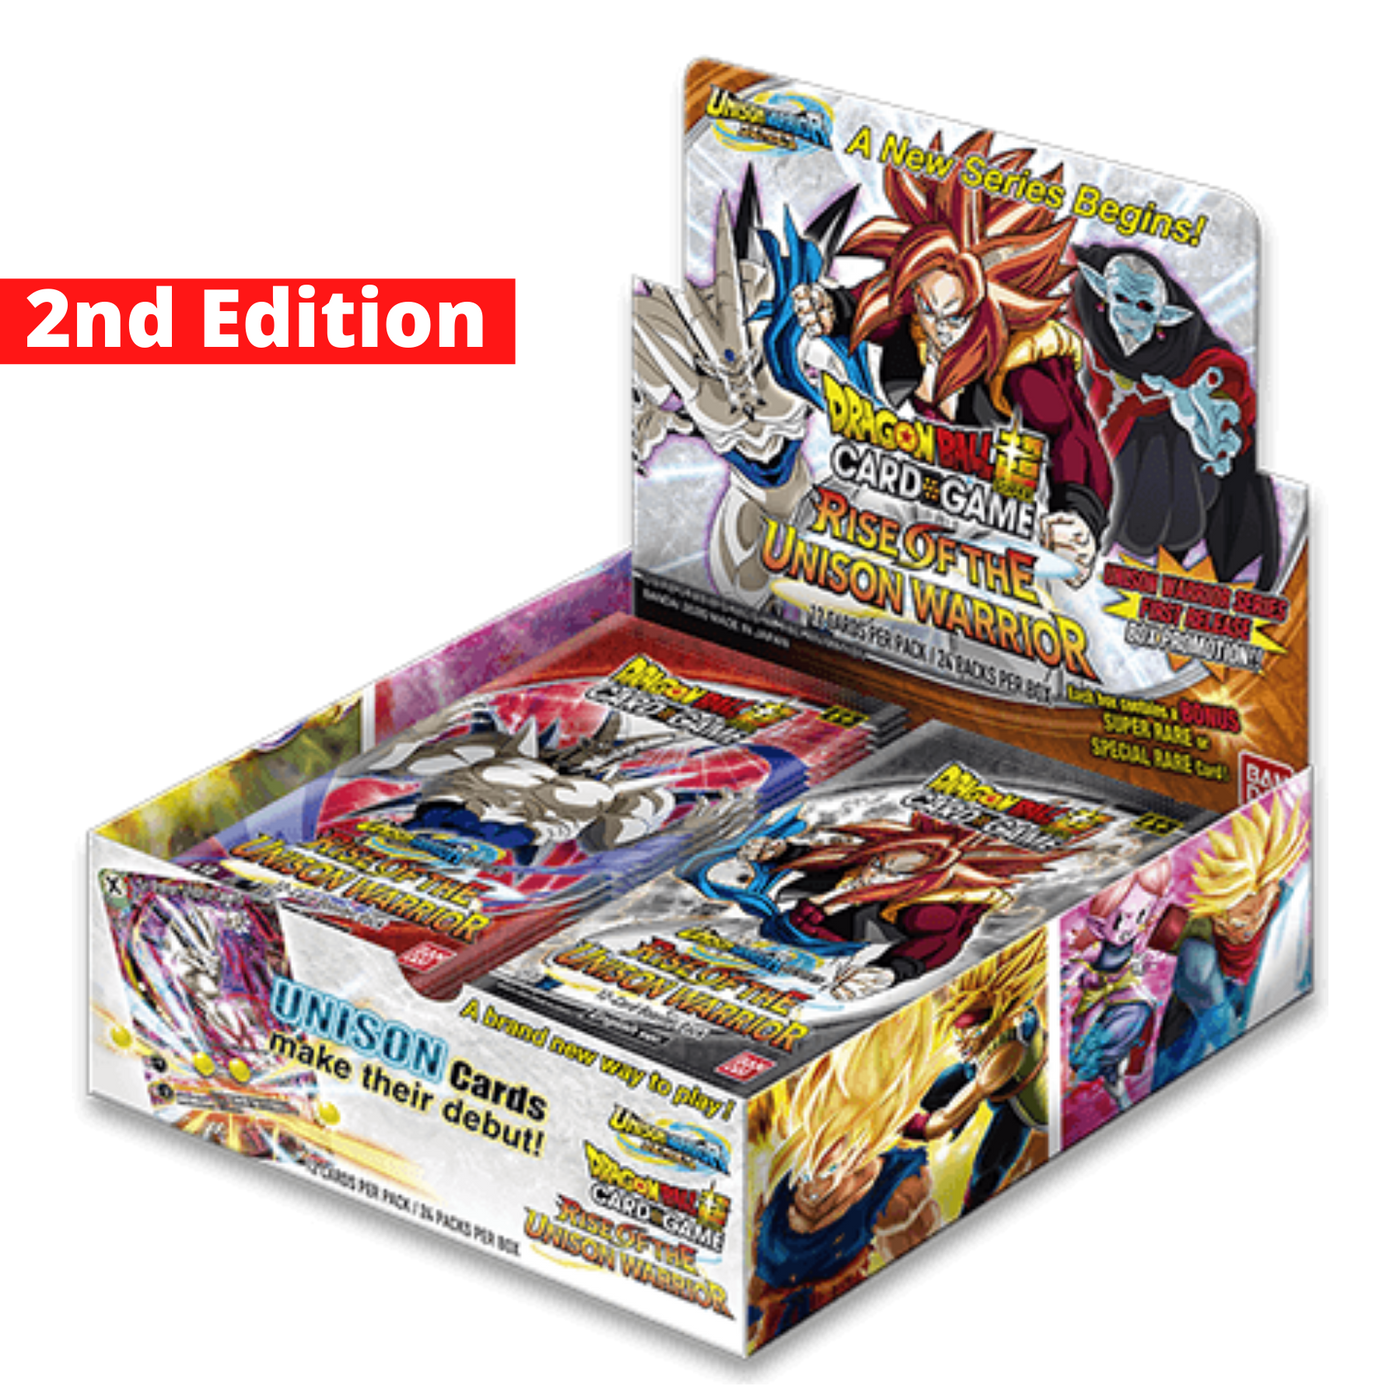 Dragon Ball Super Card Game - Rise of the Unison Warrior - 2nd Edition - Display Booster Box - Englisch